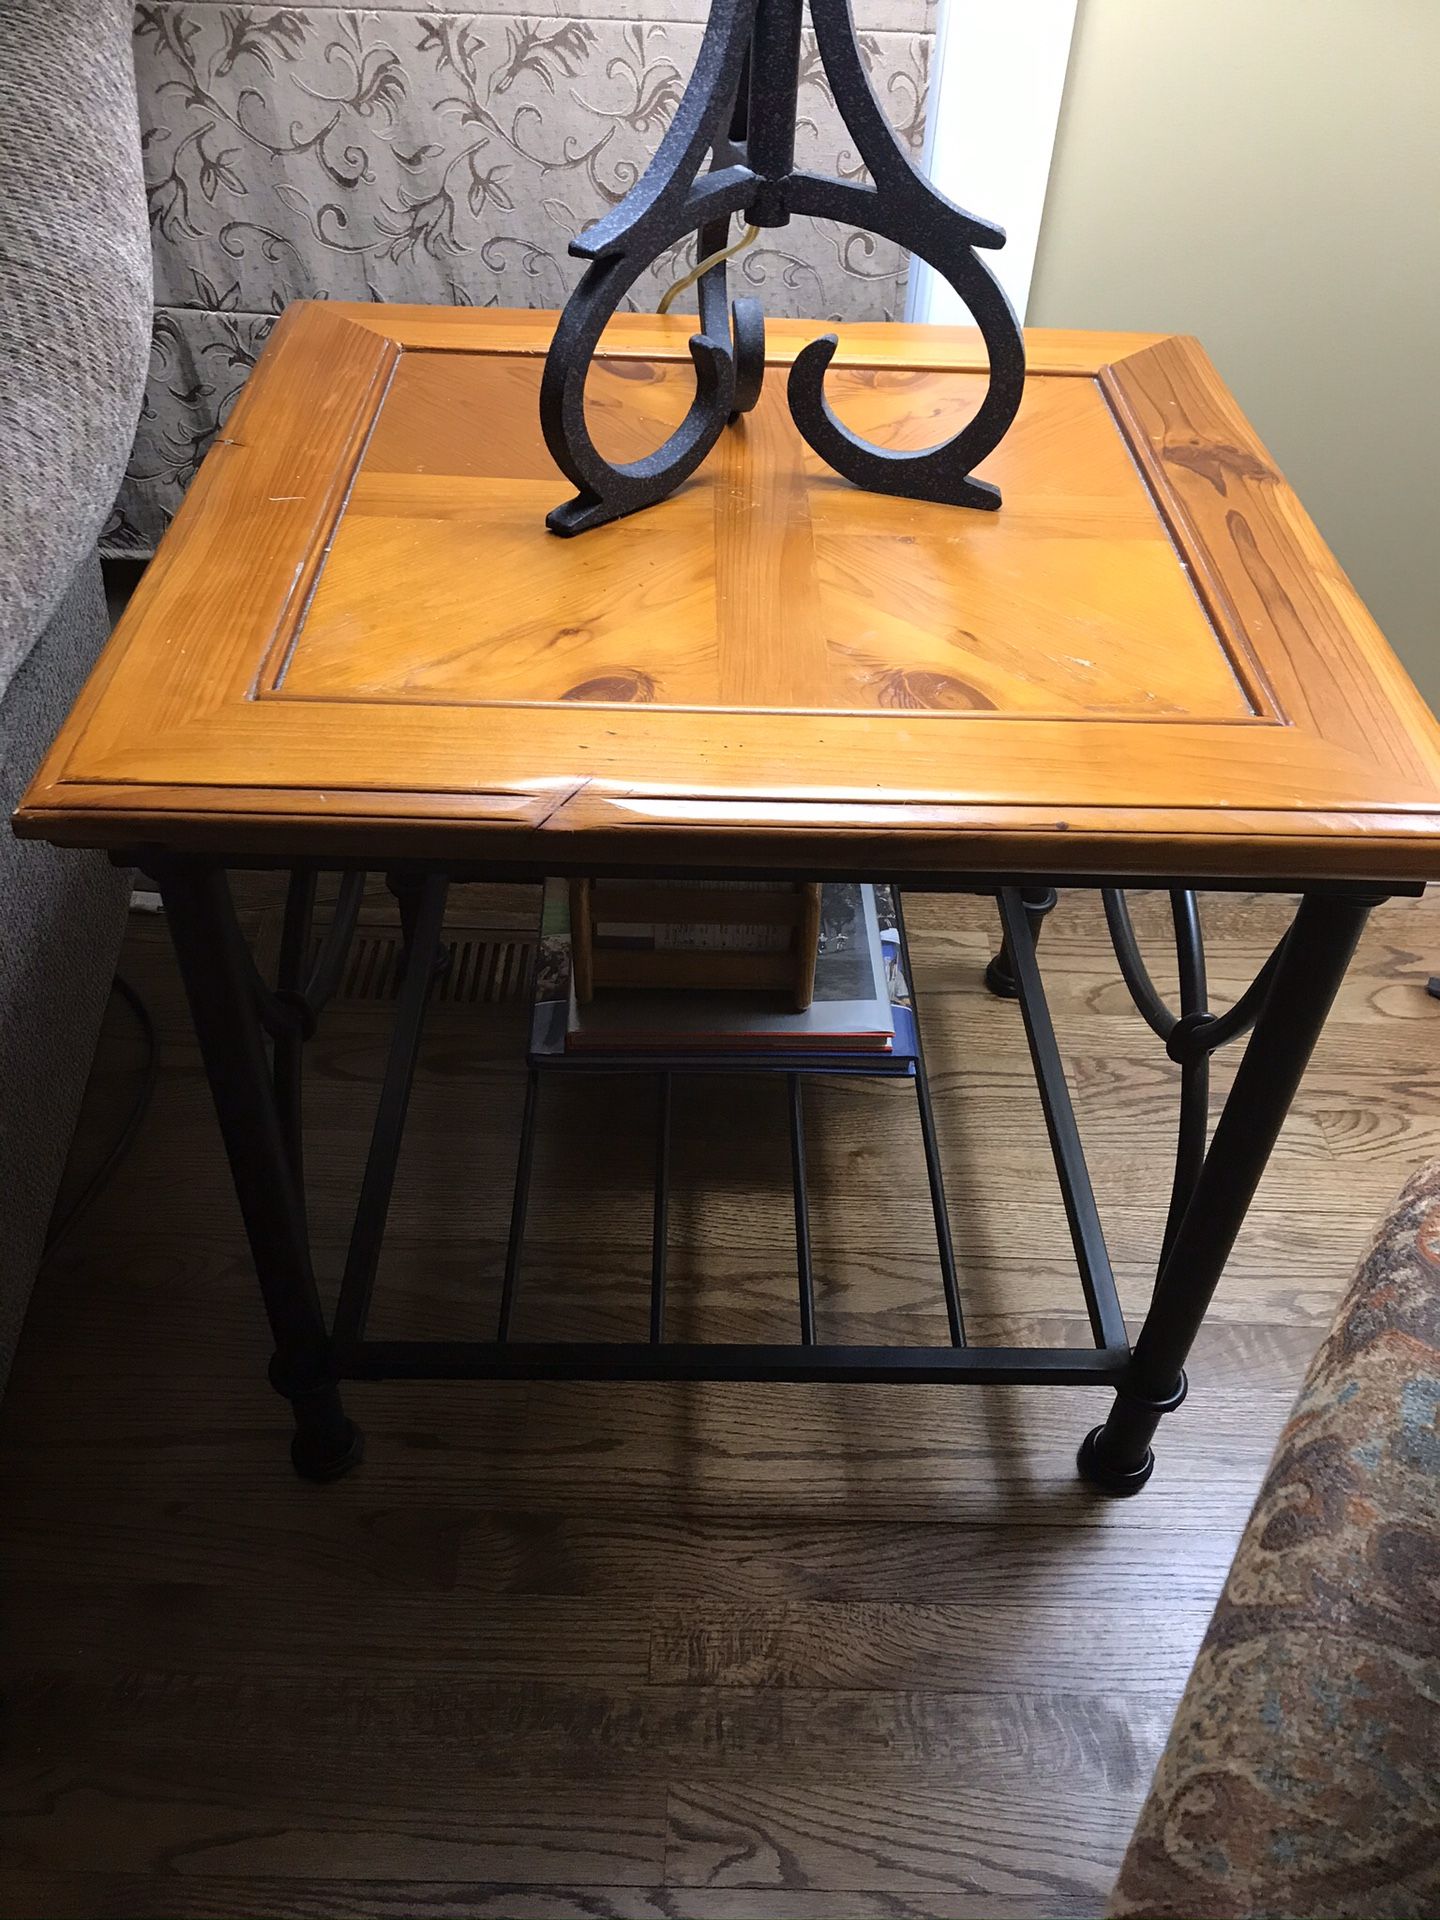 Coffee Table & Side Table - Sold as a set